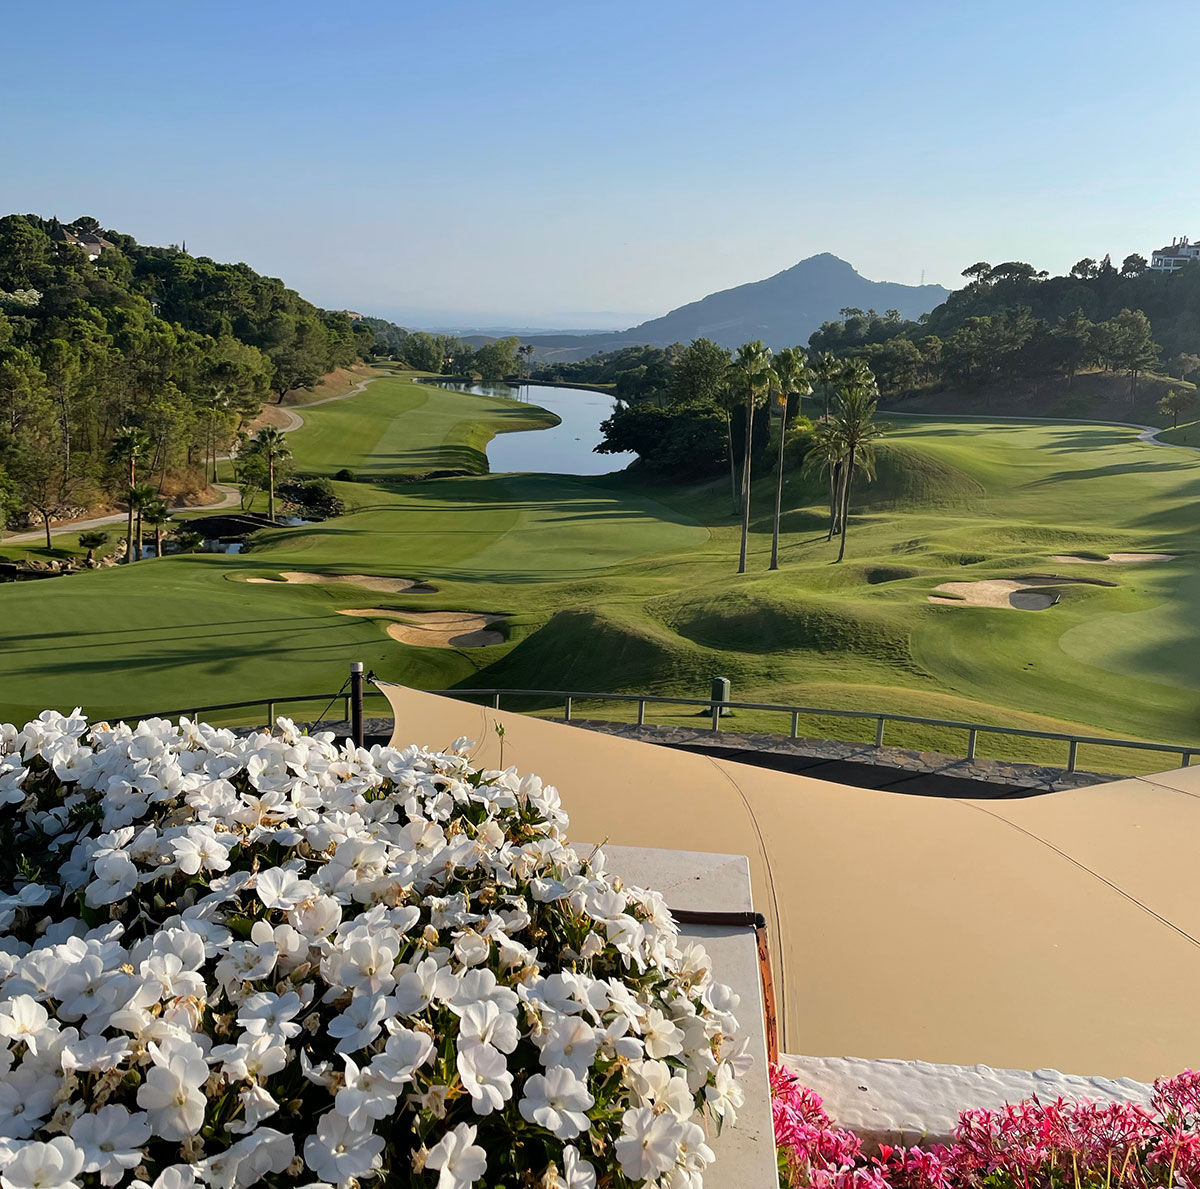 La Zagaleta golf course from the Clubhouse